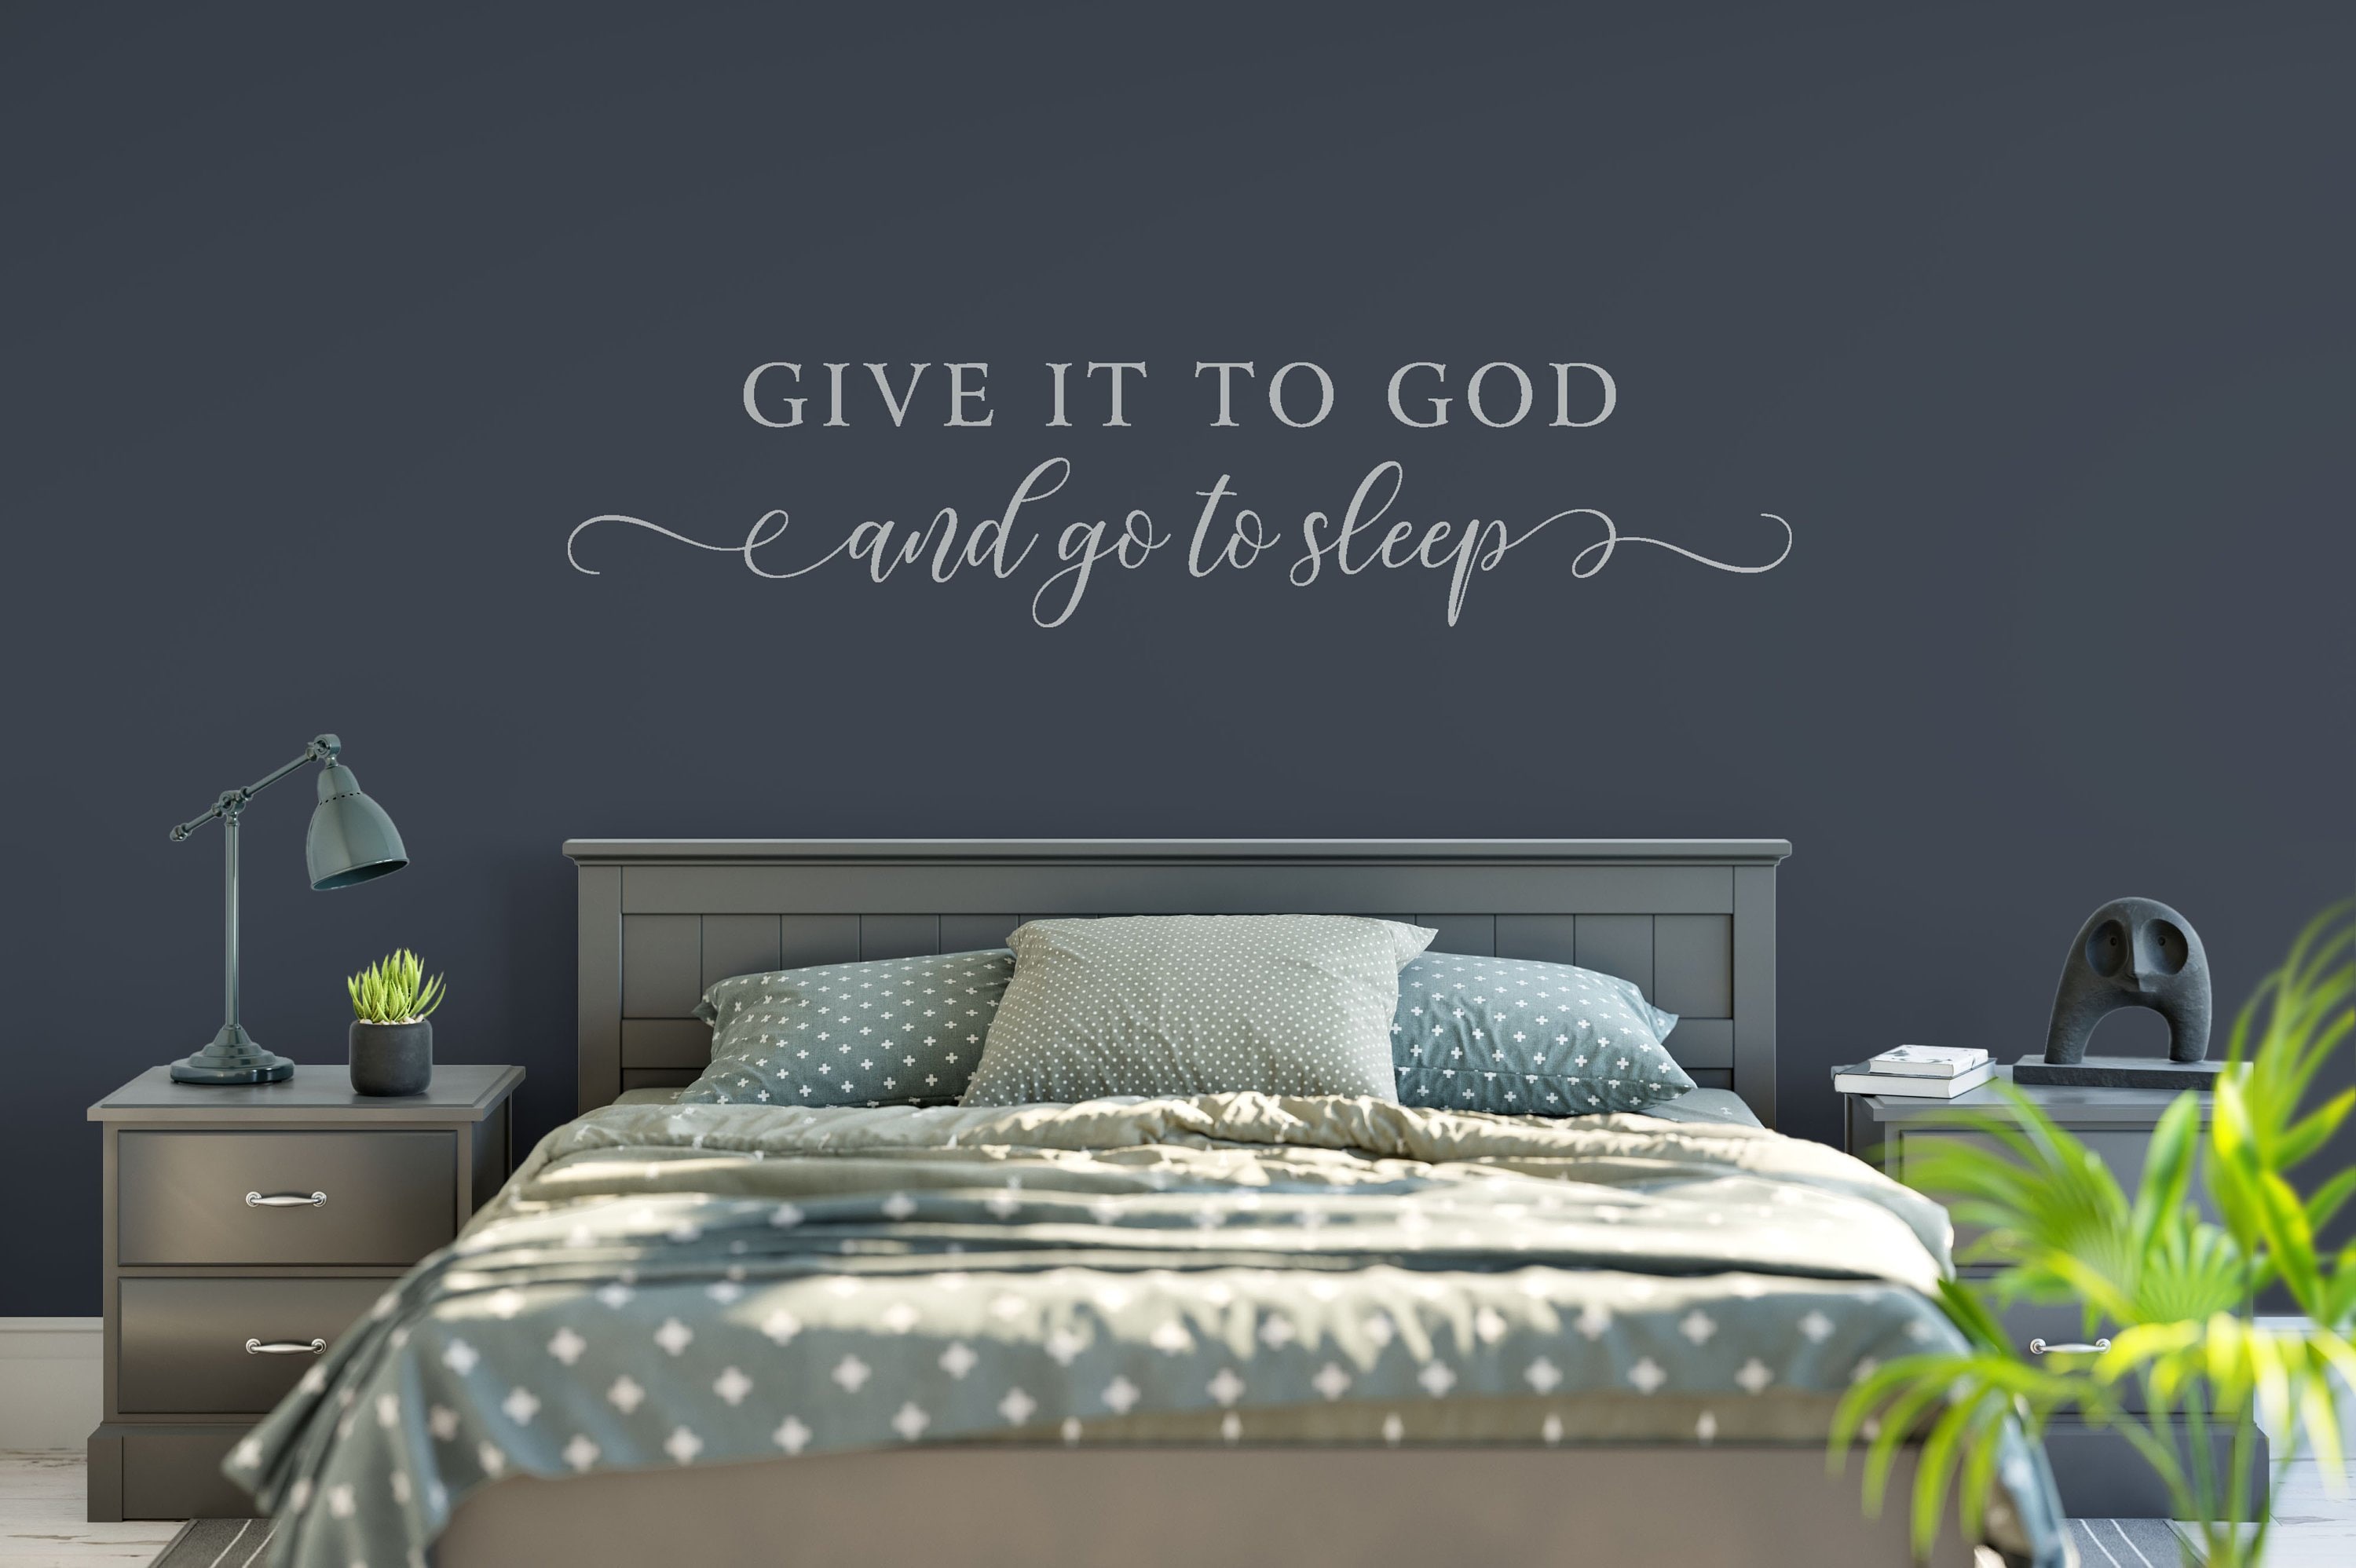 Give It To God And Go To Sleep Removable Vinyl Wall Art Decal Sticker Color//Size